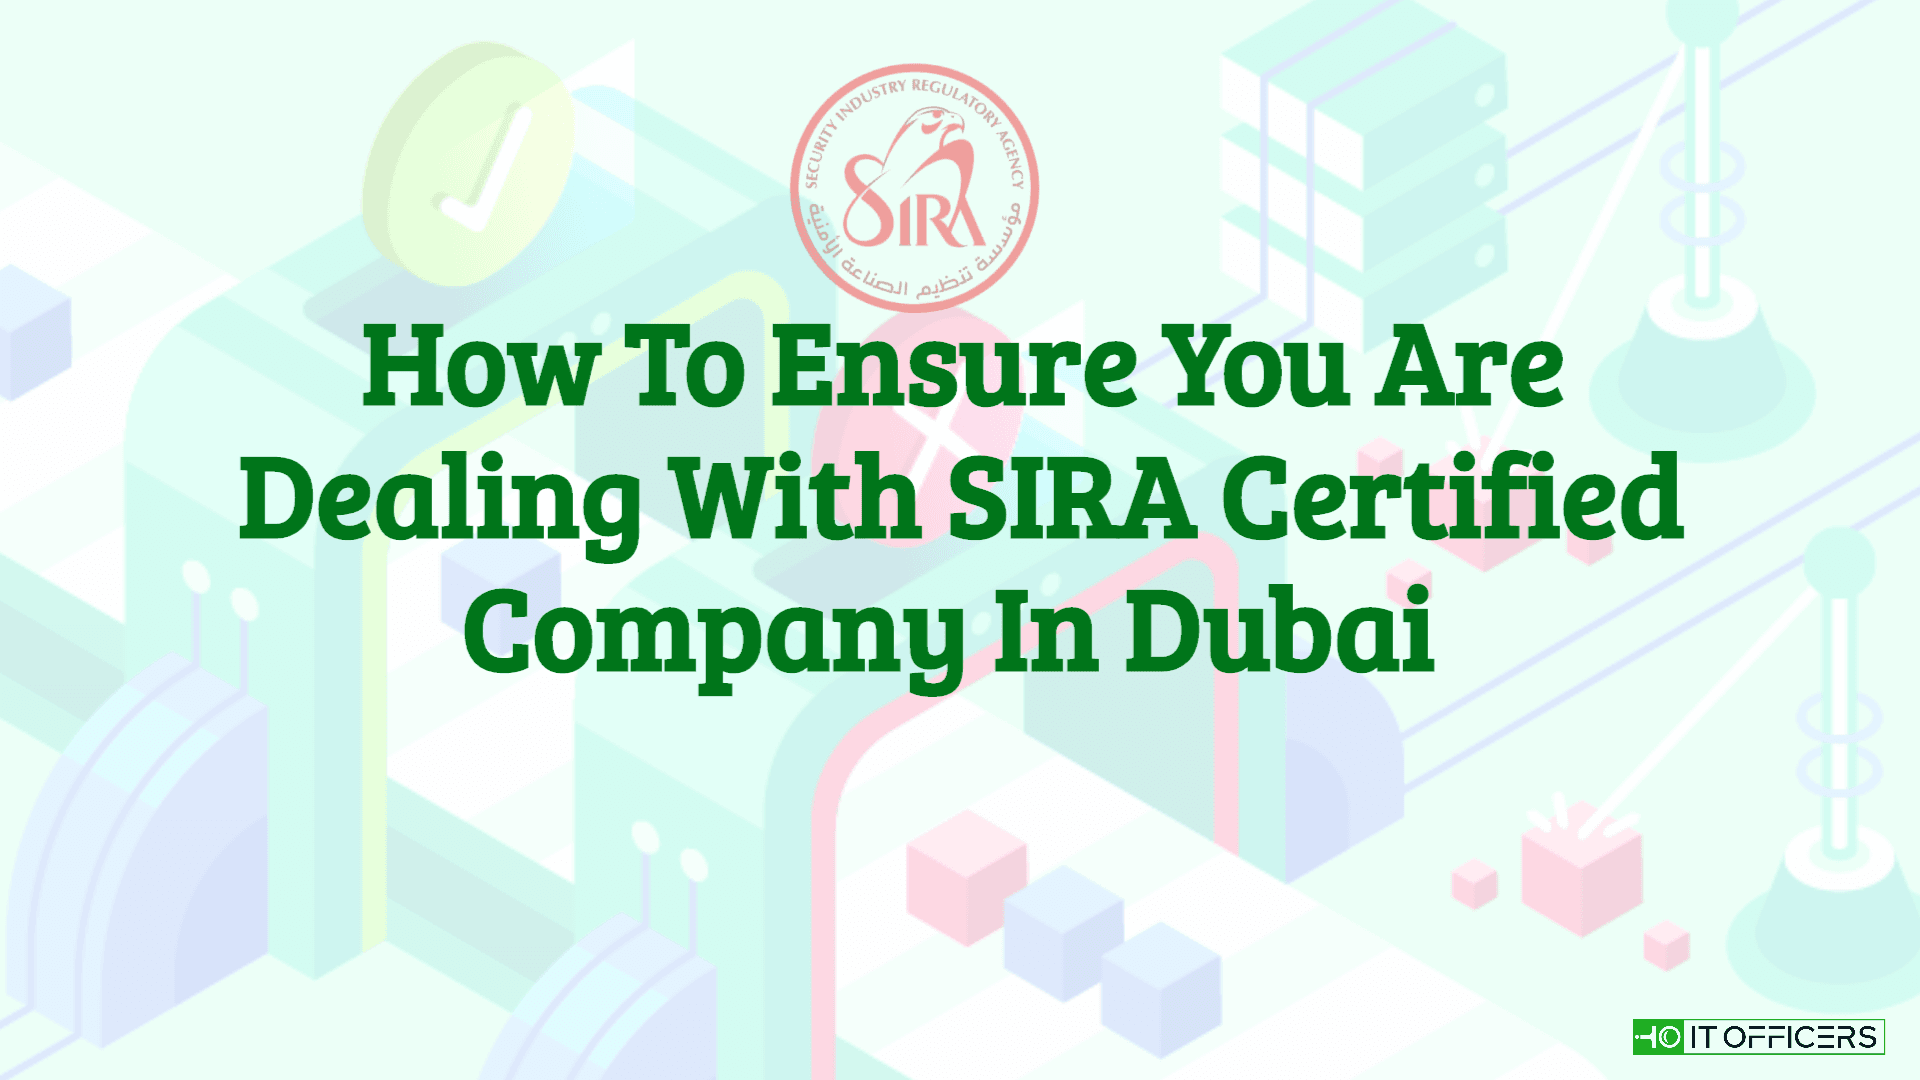 How To Ensure You Are Dealing With SIRA Certified Company In Dubai